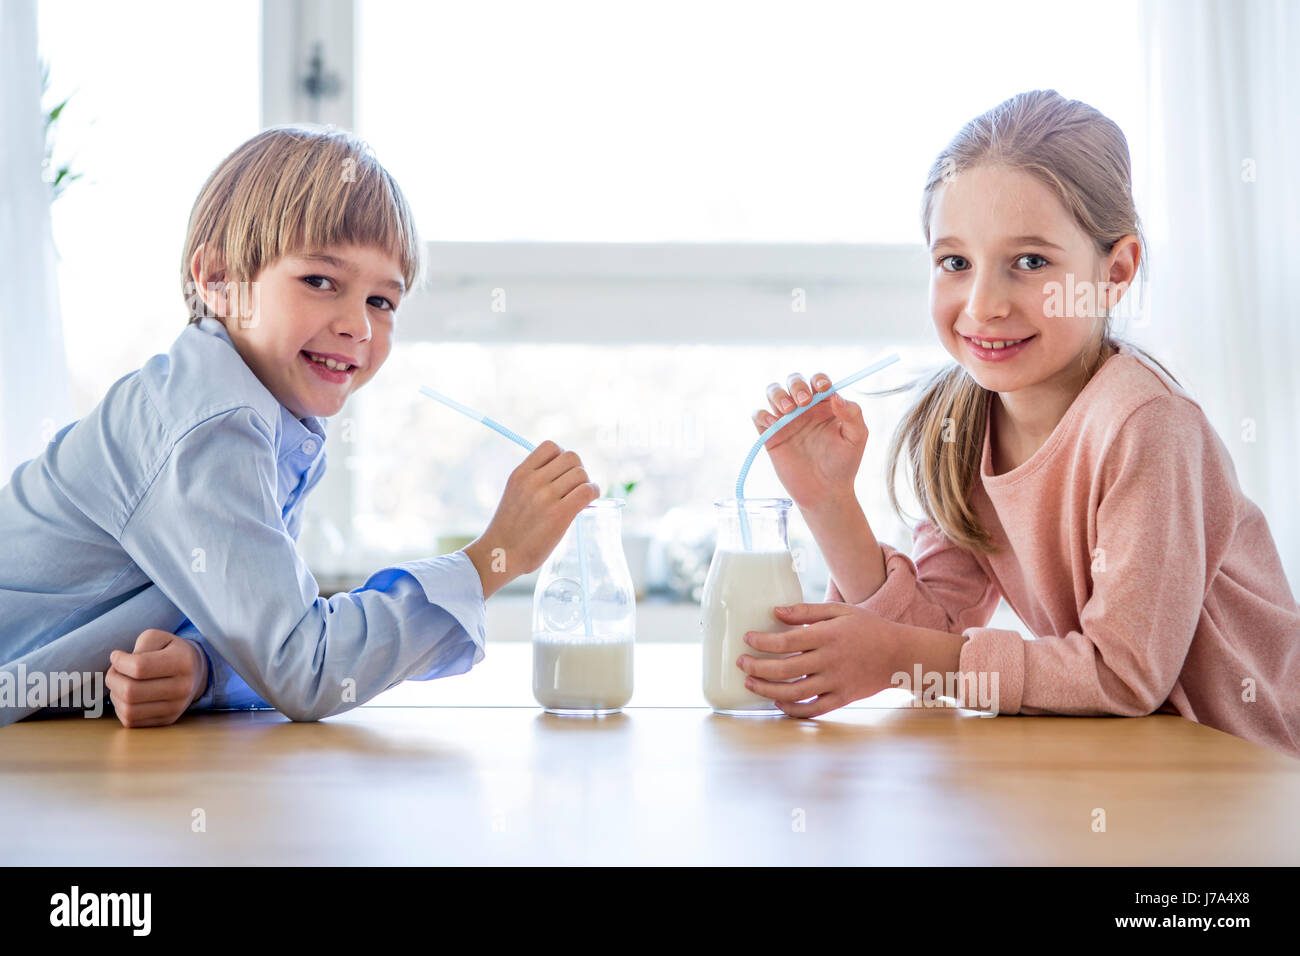 https://c8.alamy.com/comp/J7A4X8/brother-and-sister-drinking-milk-J7A4X8.jpg